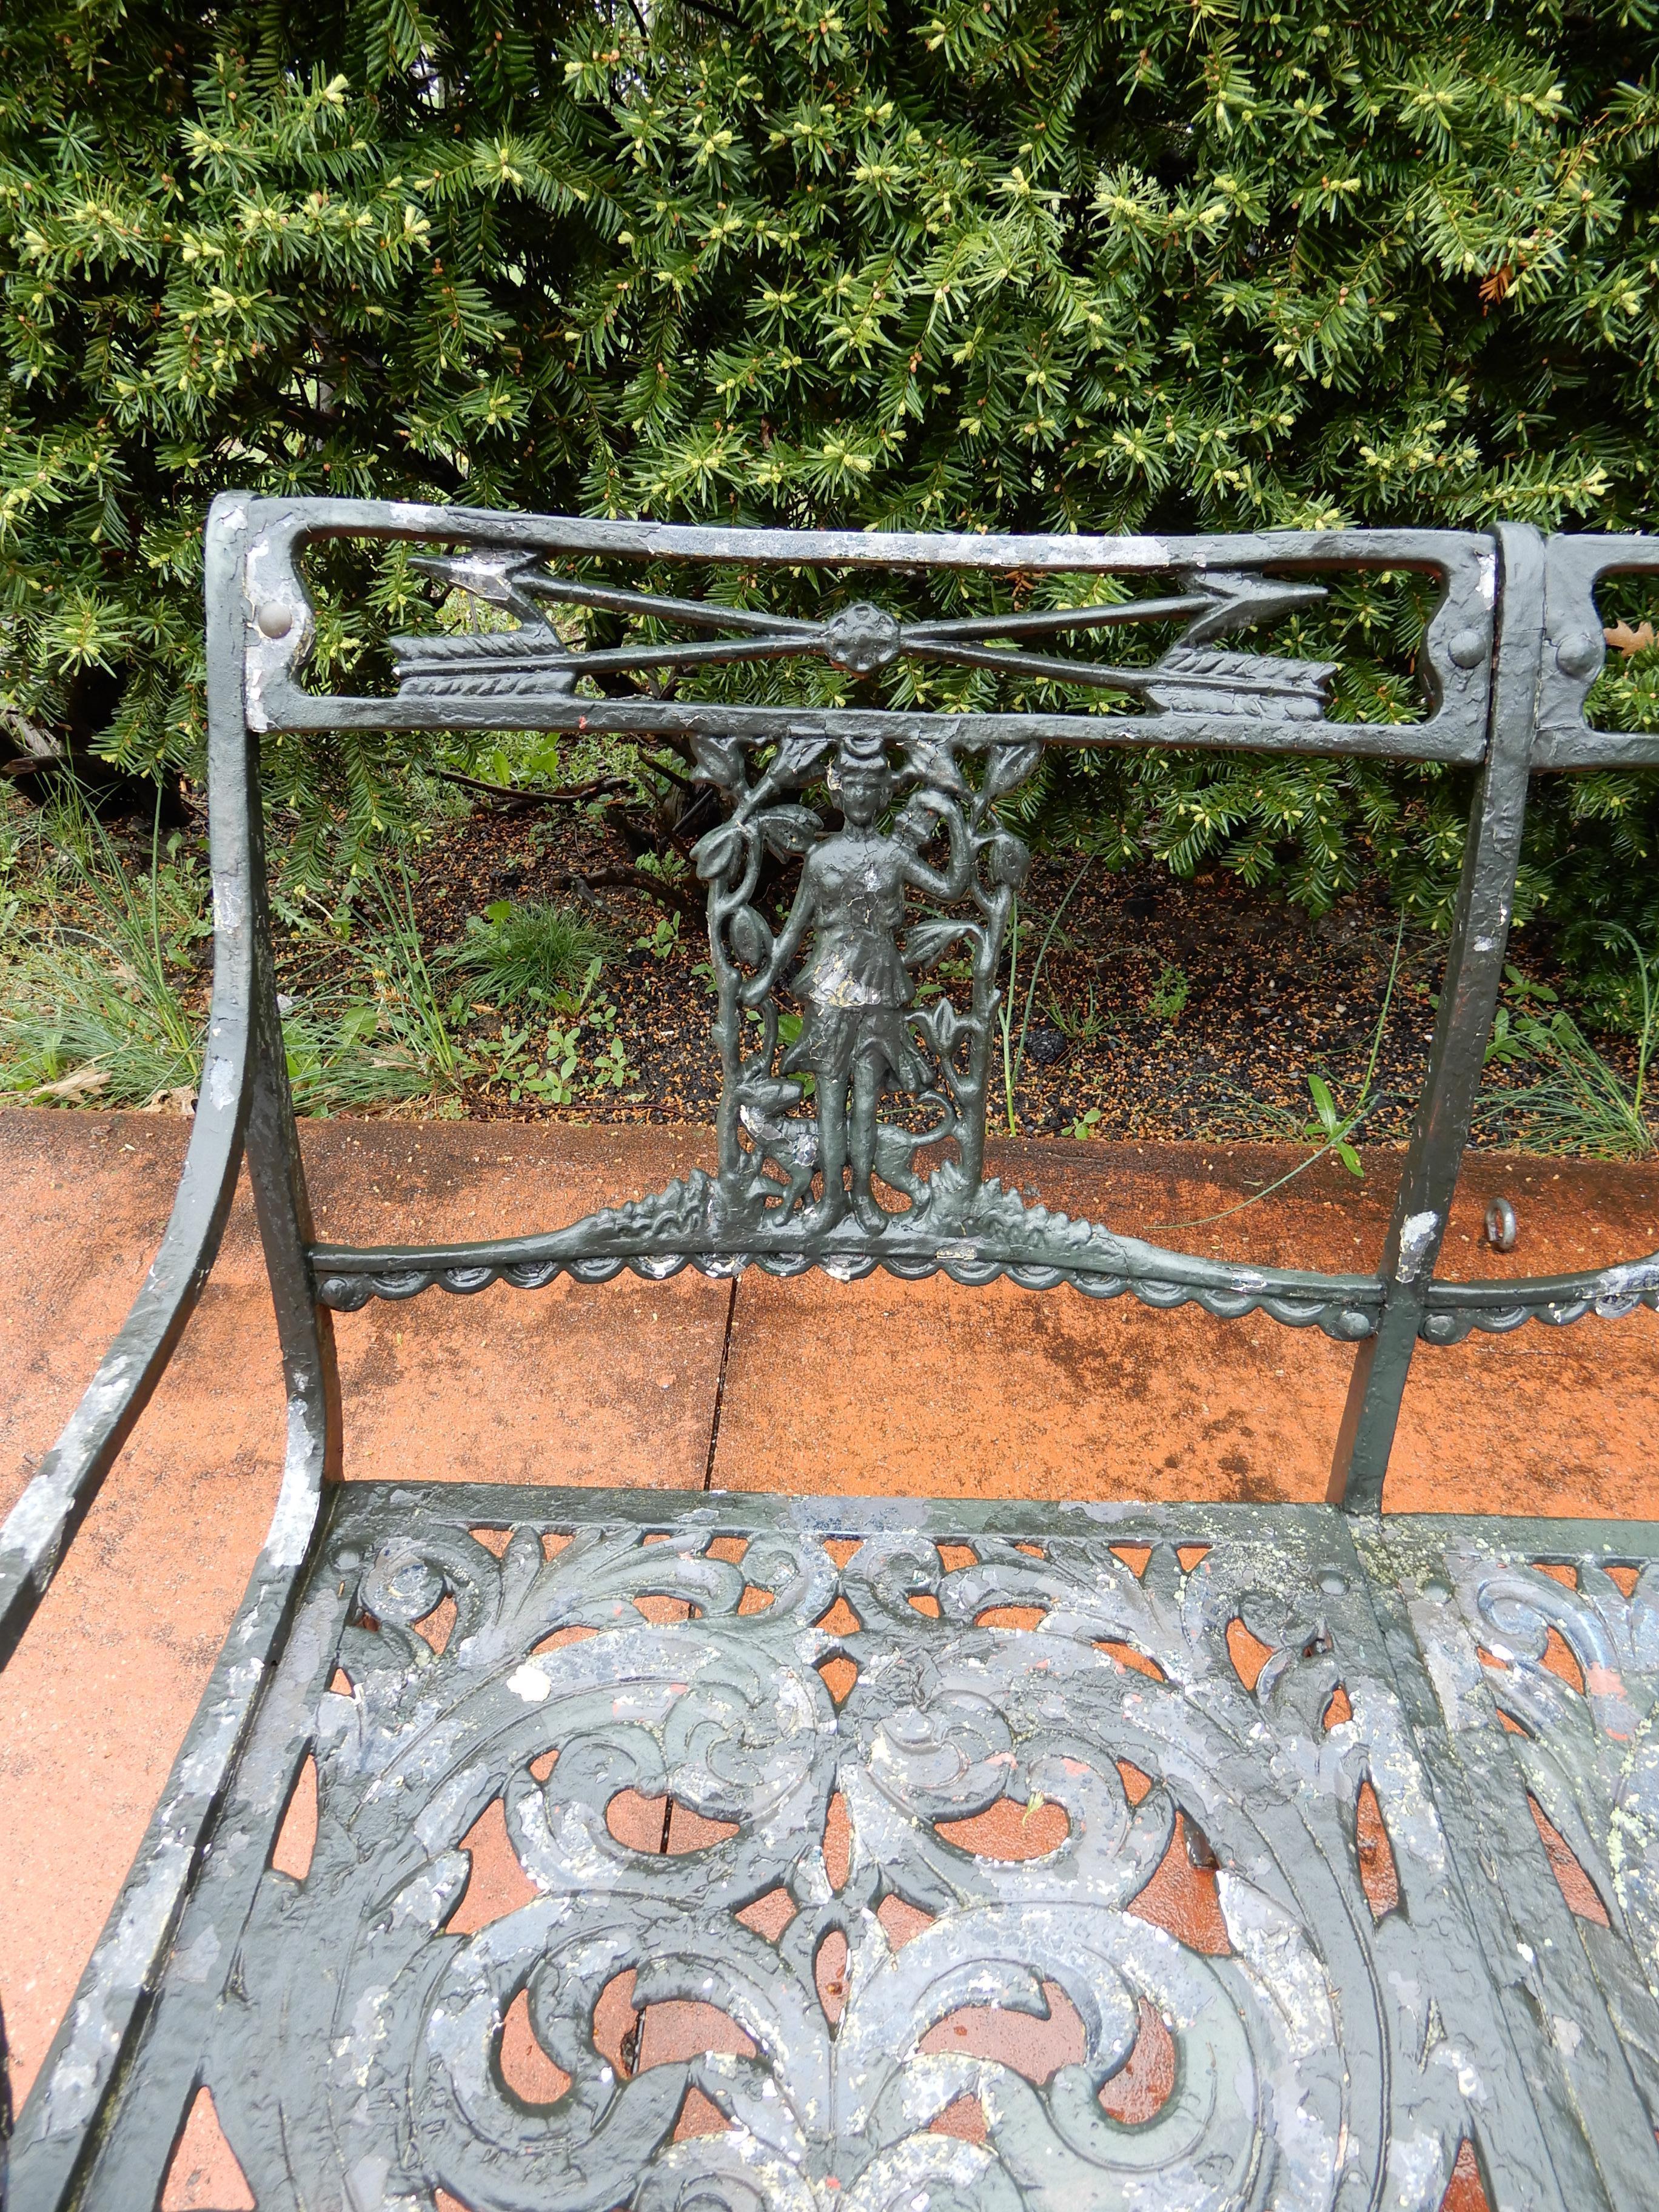 A vintage garden bench by Molla in the unusual “Diana the Huntress” pattern. This bench is made of cast aluminum which Molla was known for. This bench is a 3-seat and maintains its original painted finish exhibiting paint loss. Even though there is